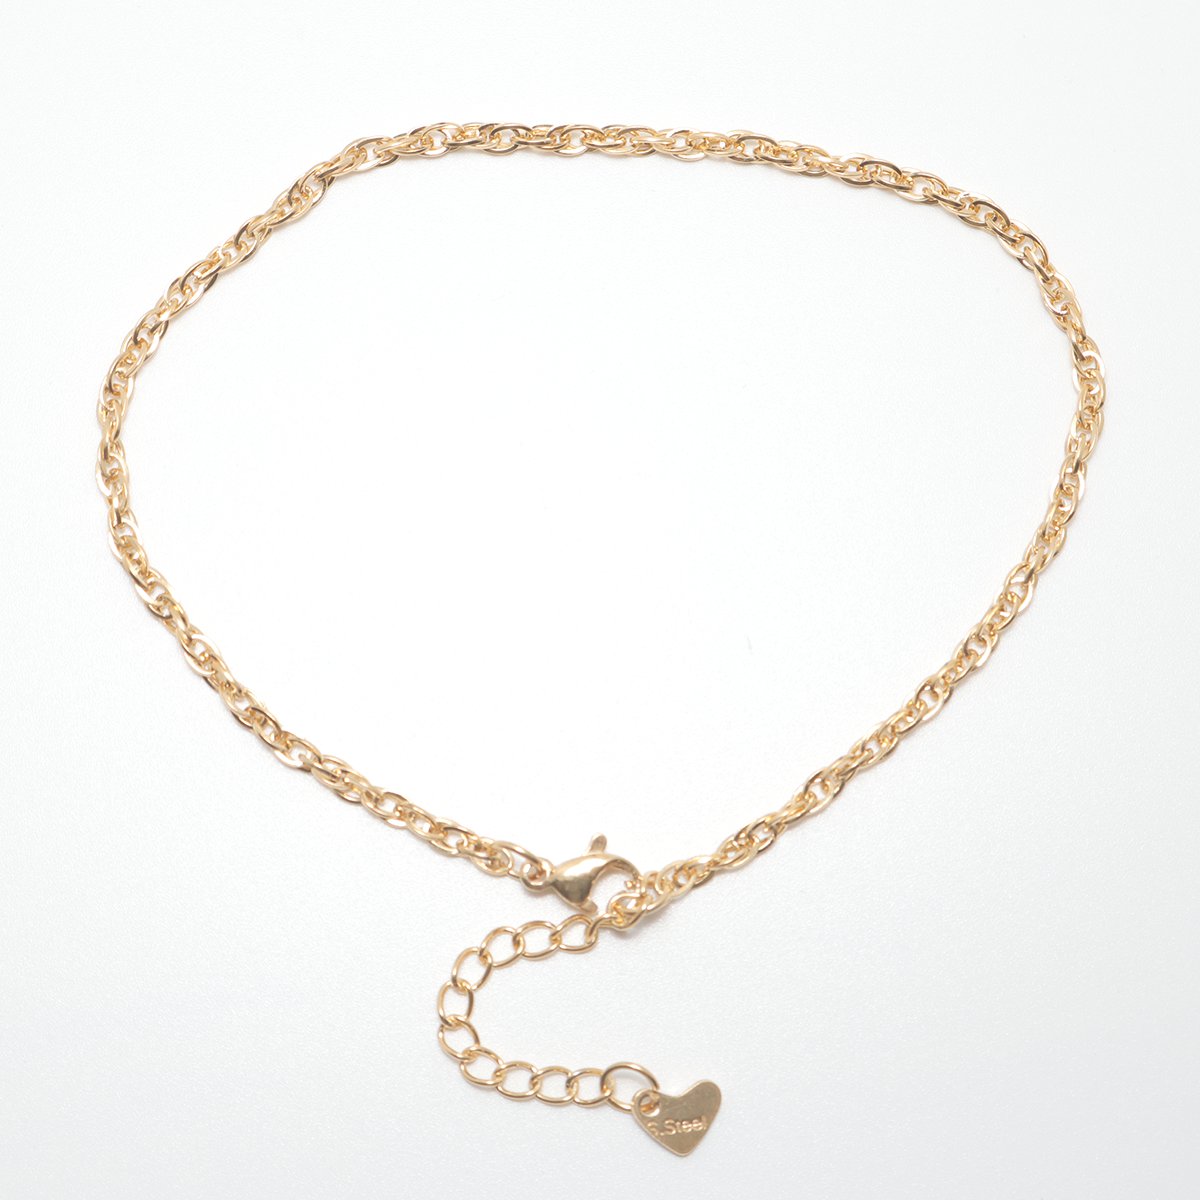 Rope Chain Golden Stainless Steel Anklet